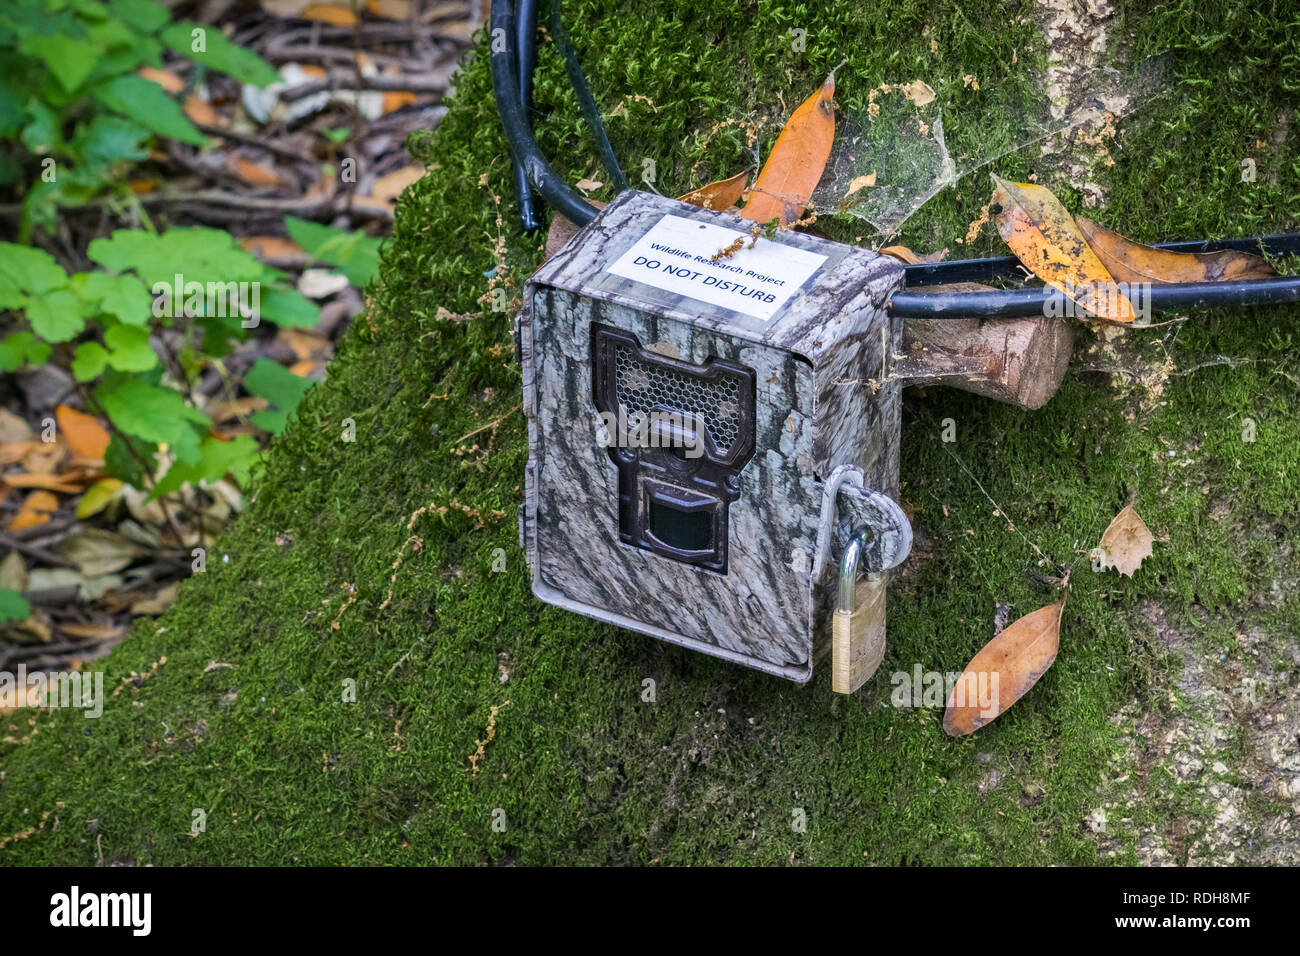 Wildlife monitoring device strapped on the base of a tree trunk, San Francisco bay area, California Stock Photo